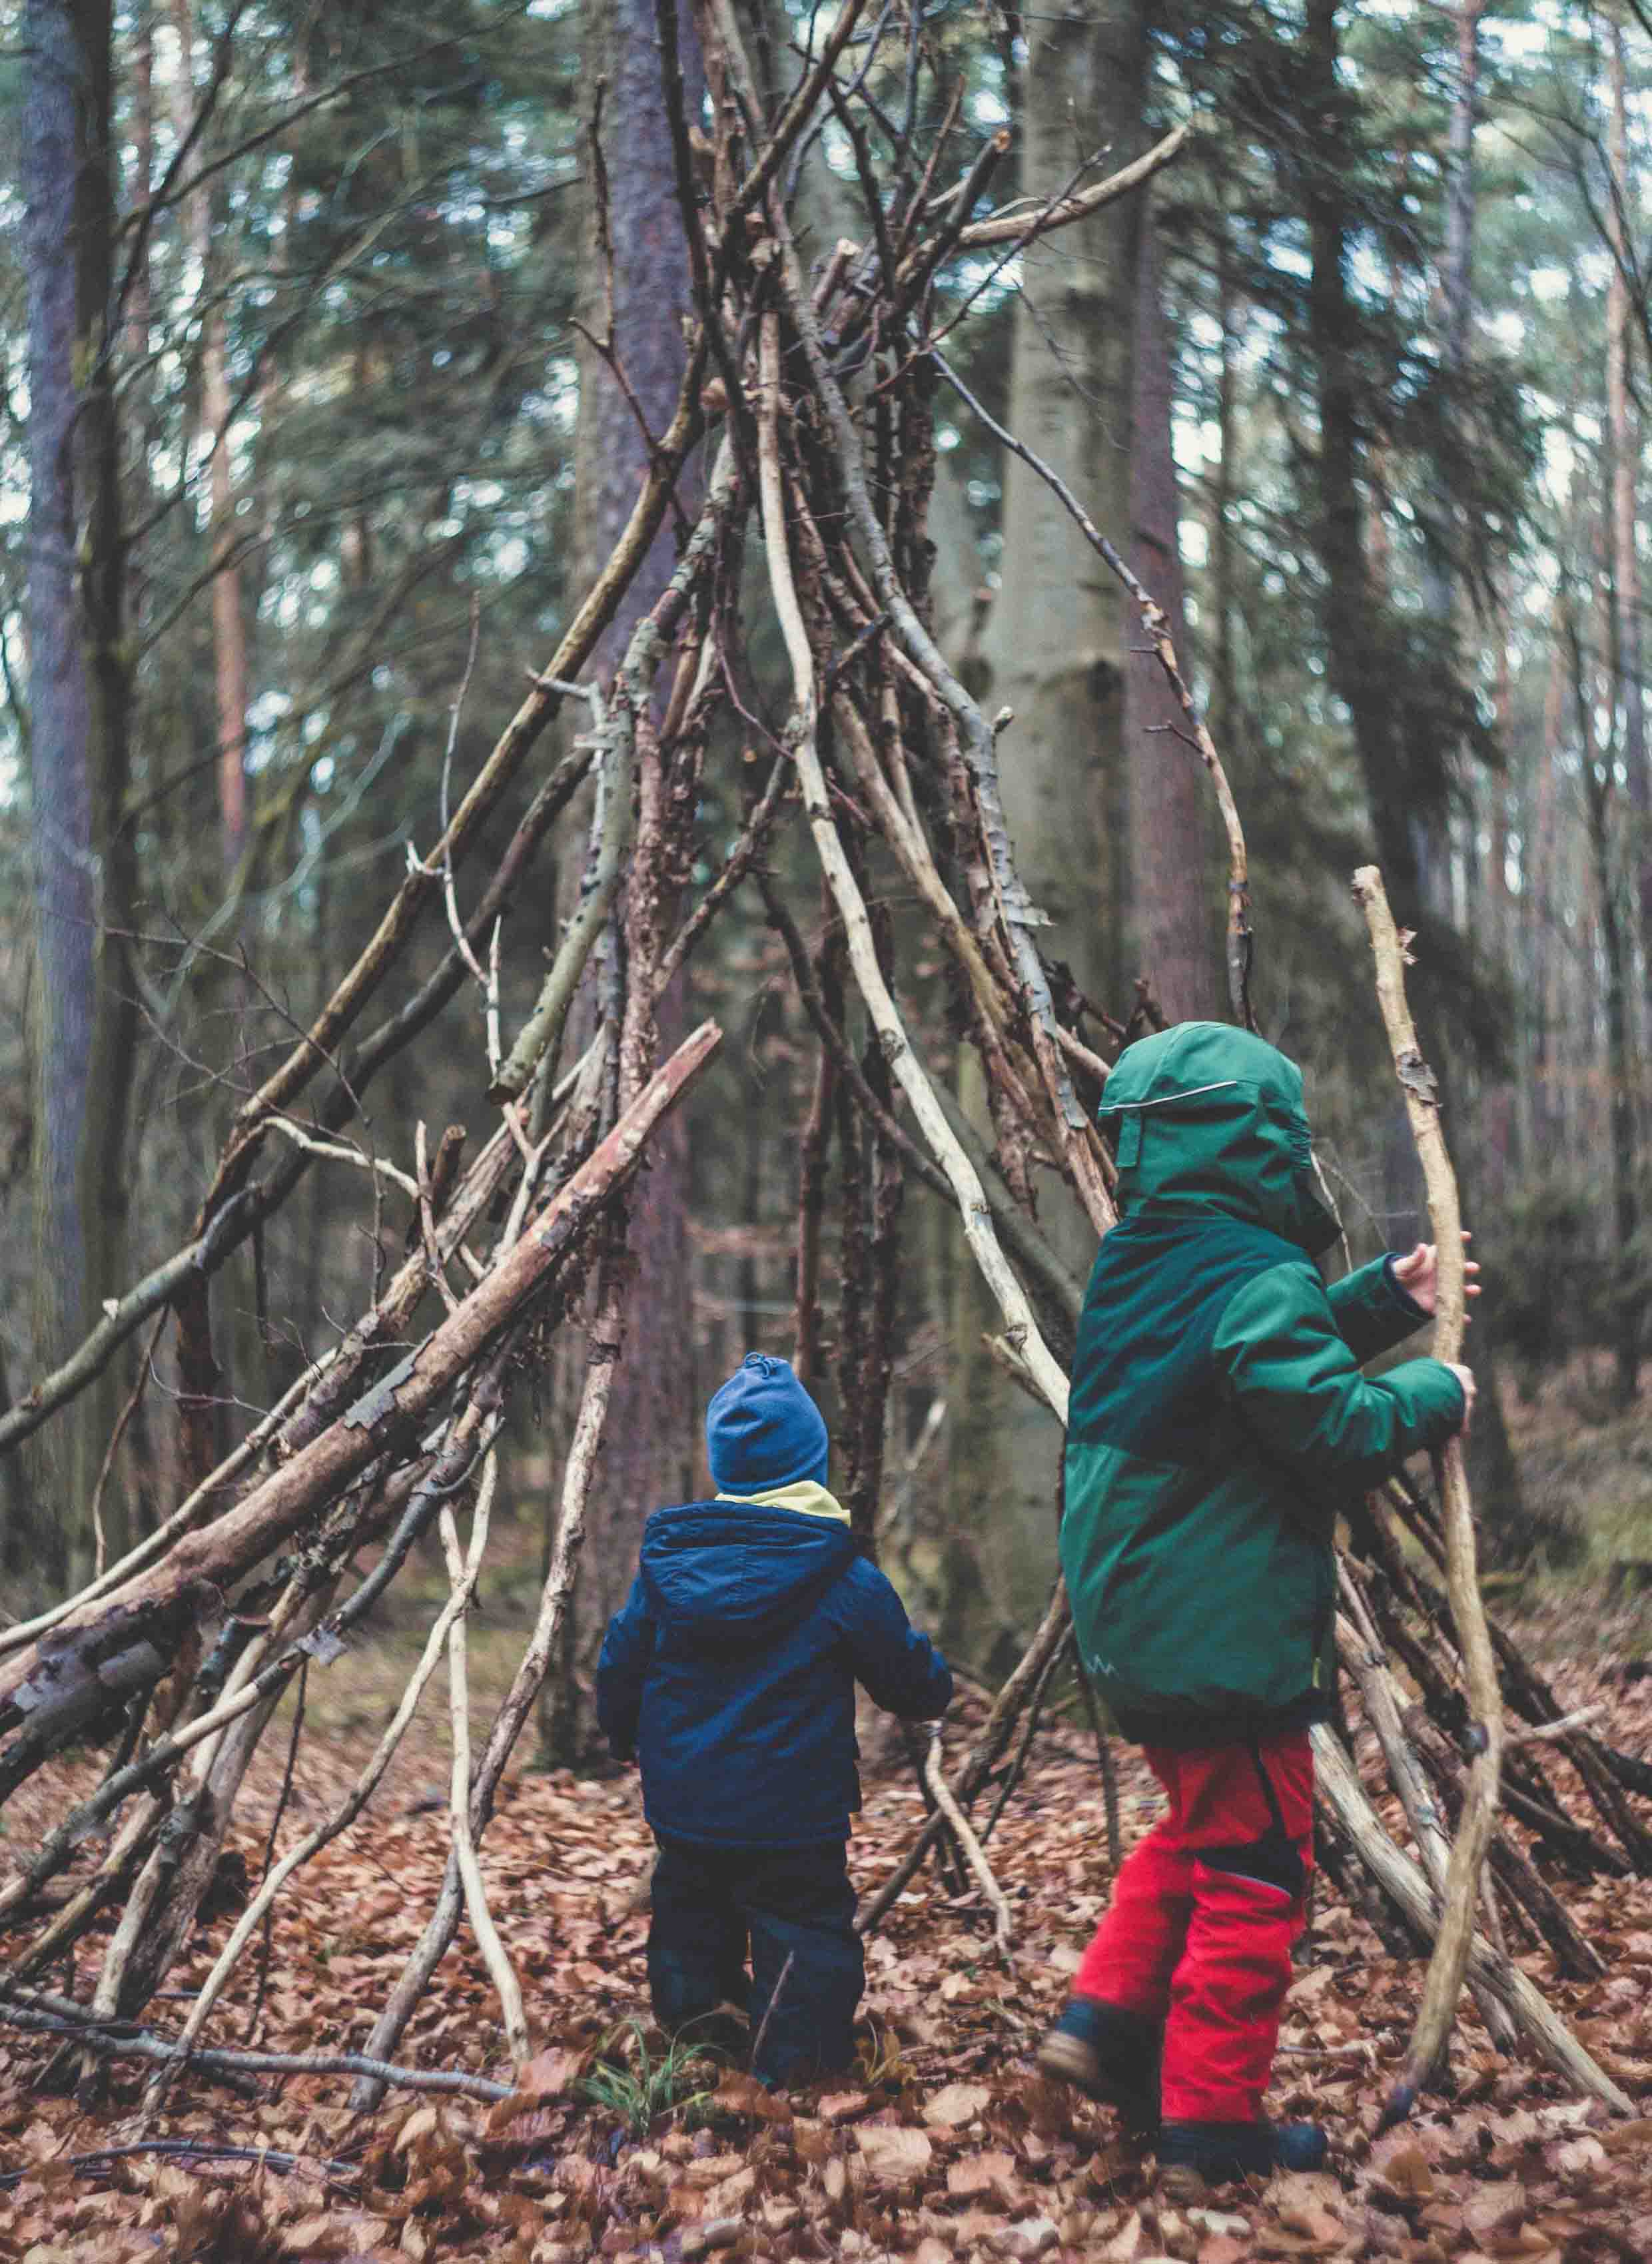 Two children dressed in waterproof clothing build a stick den in the woods